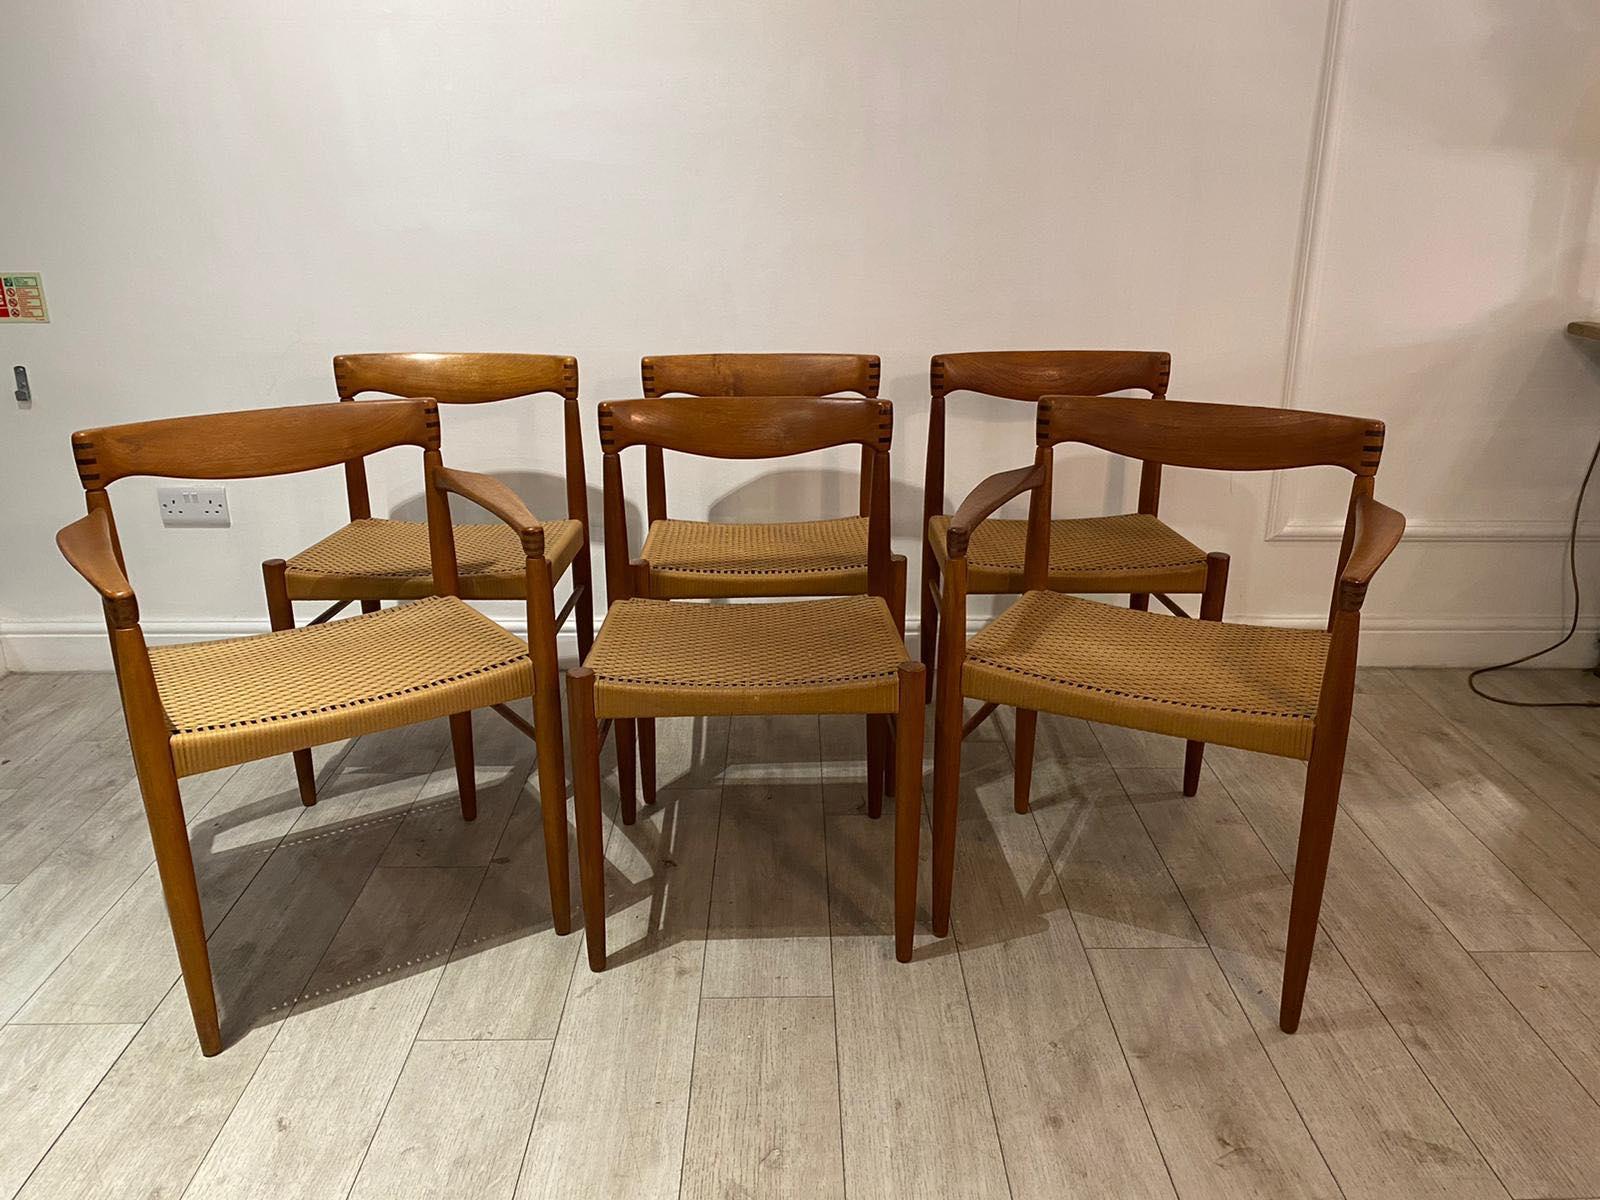 A beautiful set of 6 dining chairs and extendable dining table in teak wood designed by H.W. Klein and manufactured by Bramin furniture factory in the 1960s and have the Bramin label underneath the table top.

The chairs have beautiful and rare